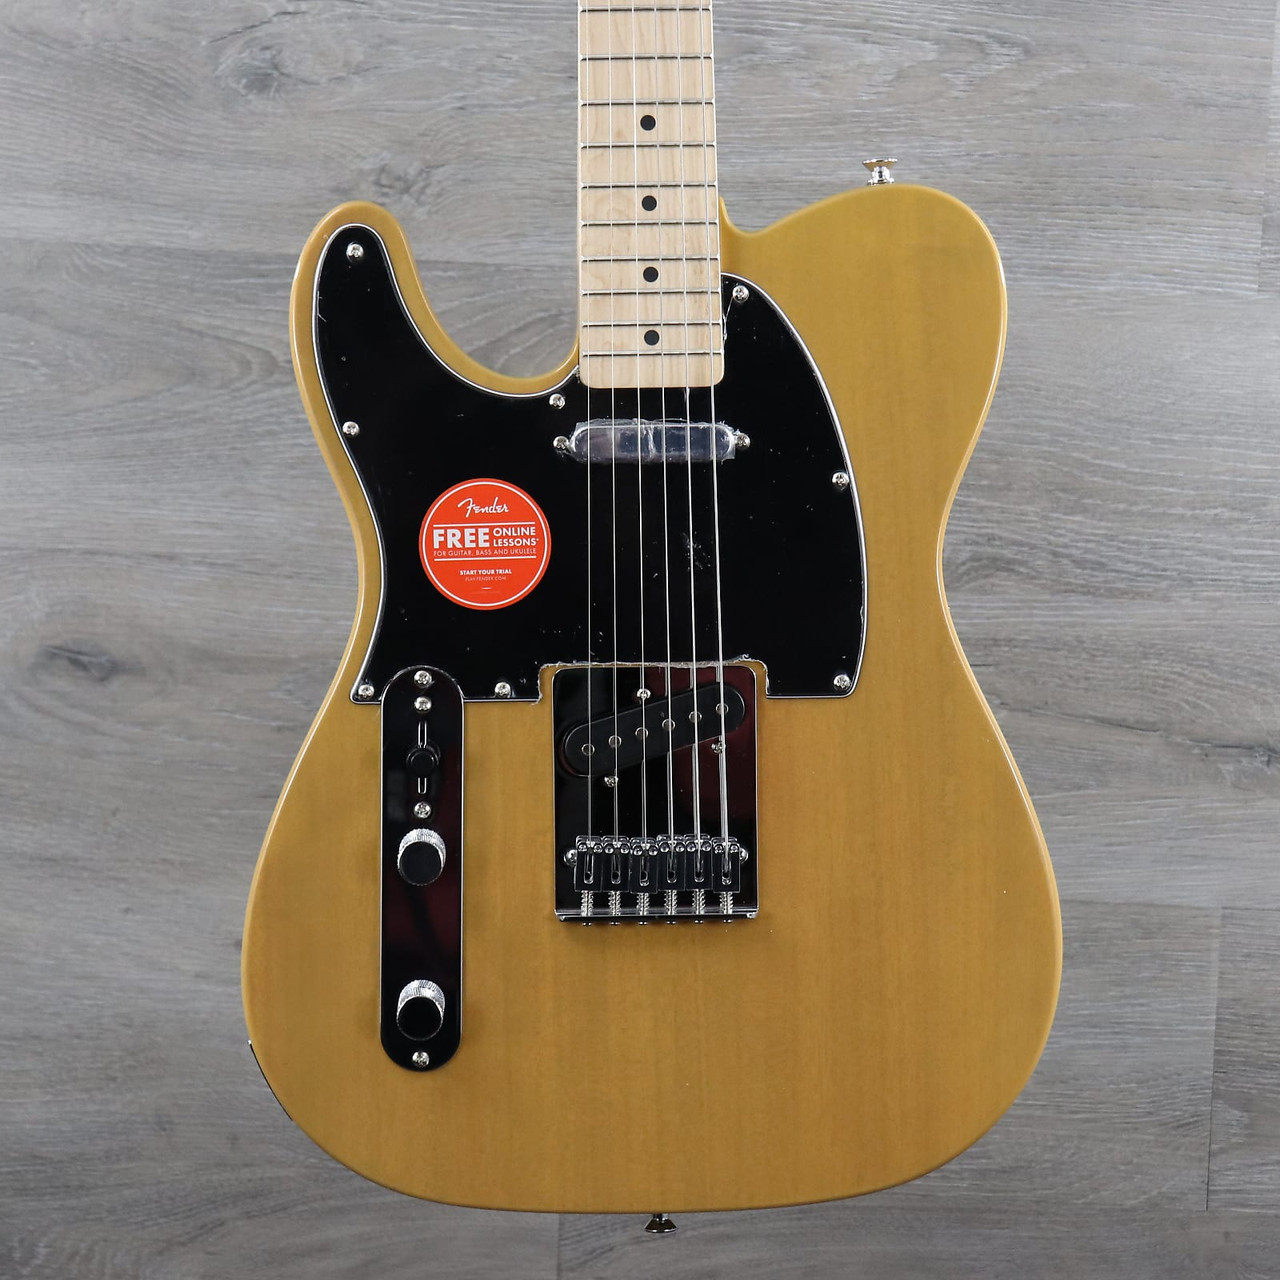 Squier Affinity Telecaster Left-Handed with String-Through Bridge